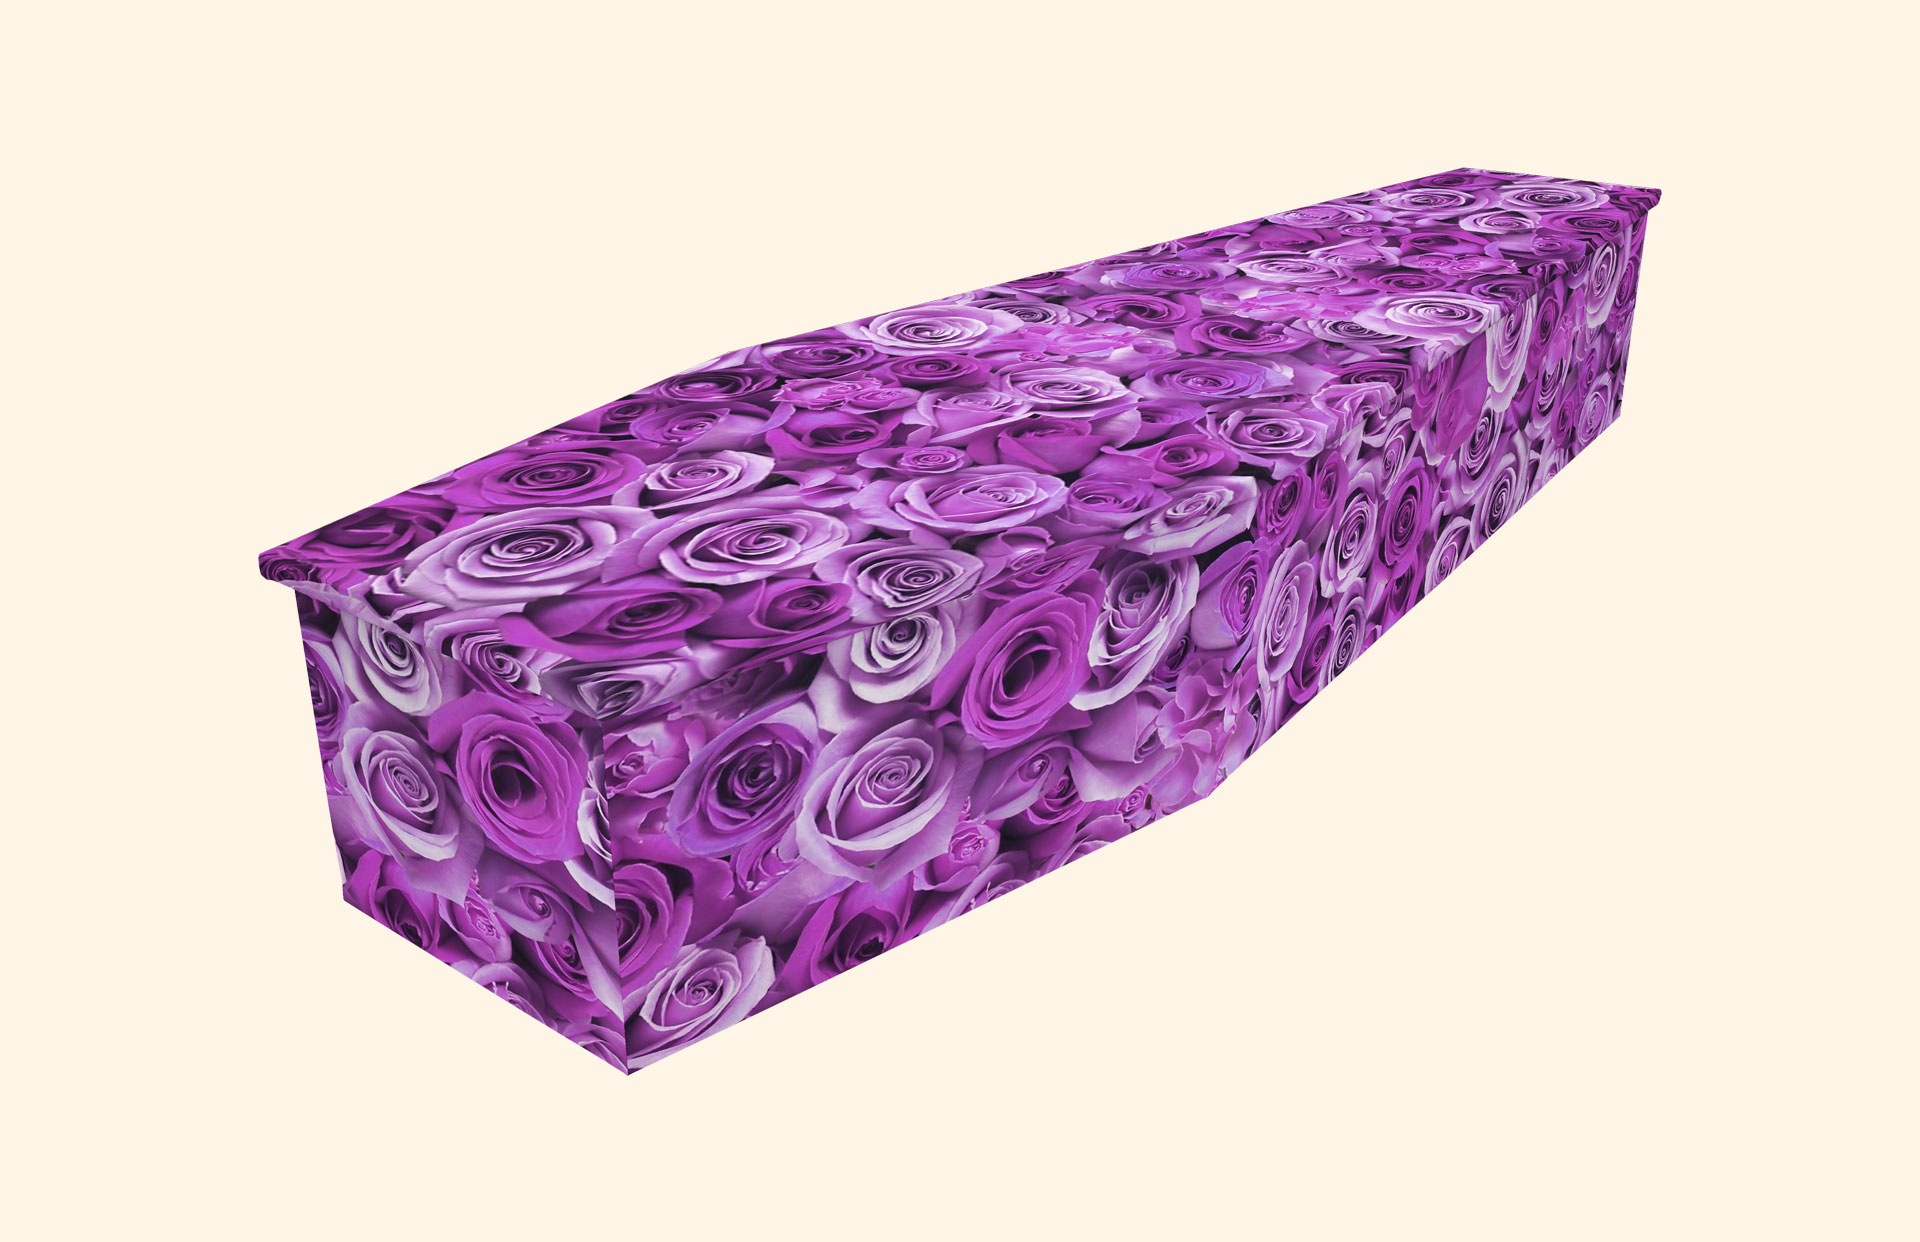 Lilac Roses design on a cardboard coffin